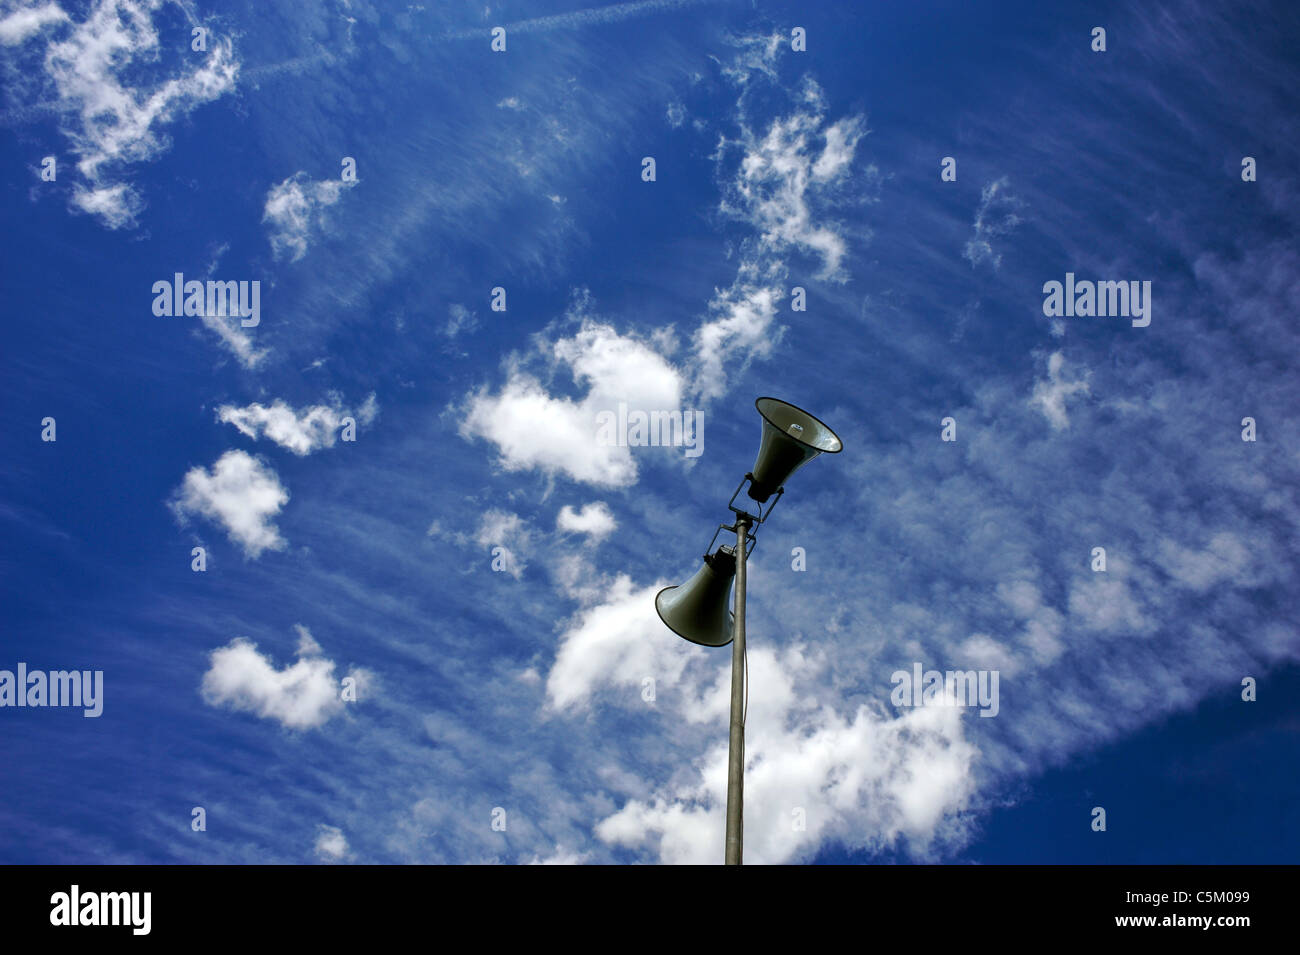 Public address speakers photographed against a summer sky. Stock Photo